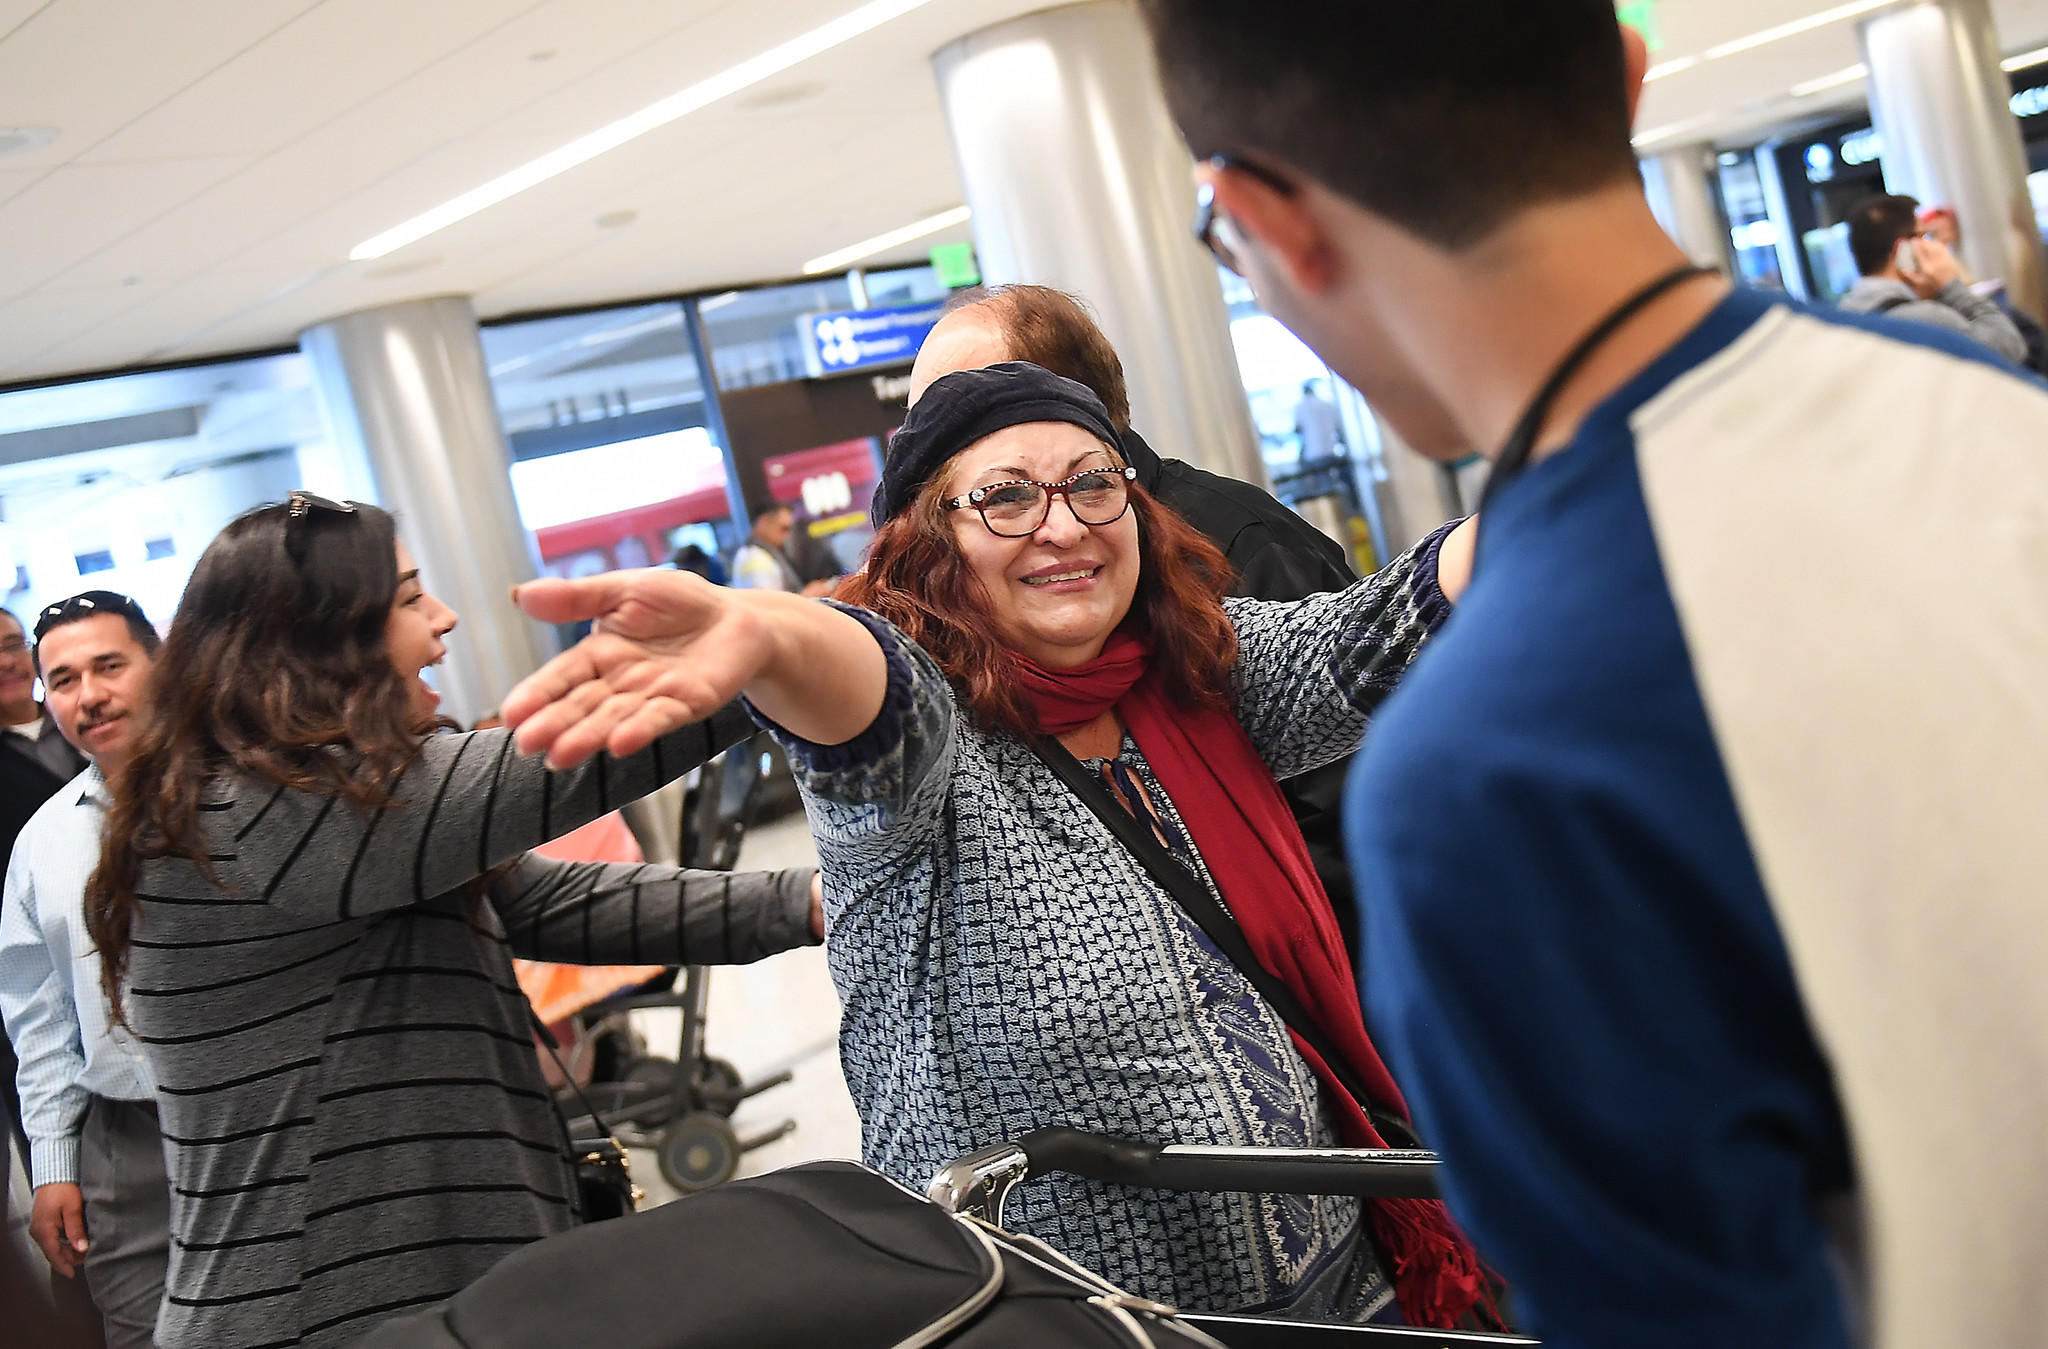 Alicia Gomez, 60, greets her son Mauricio, now 17, after he arrived at LAX from El Salvador.